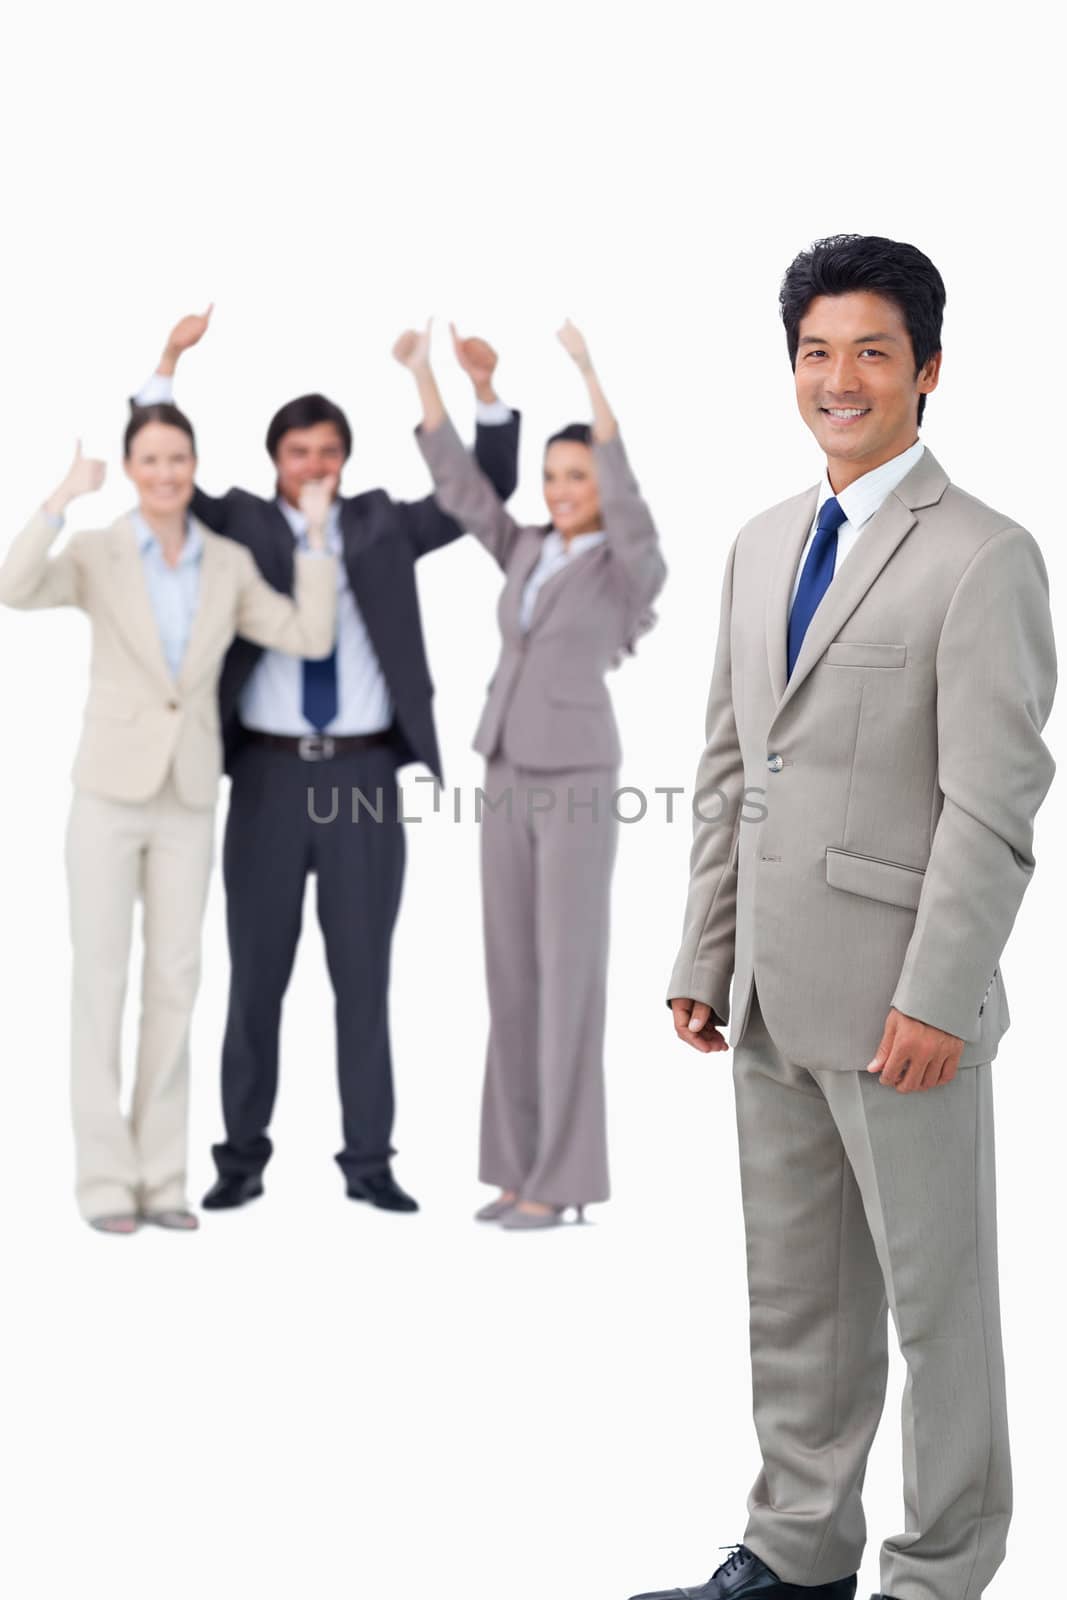 Salesman getting celebrated by his team against a white background